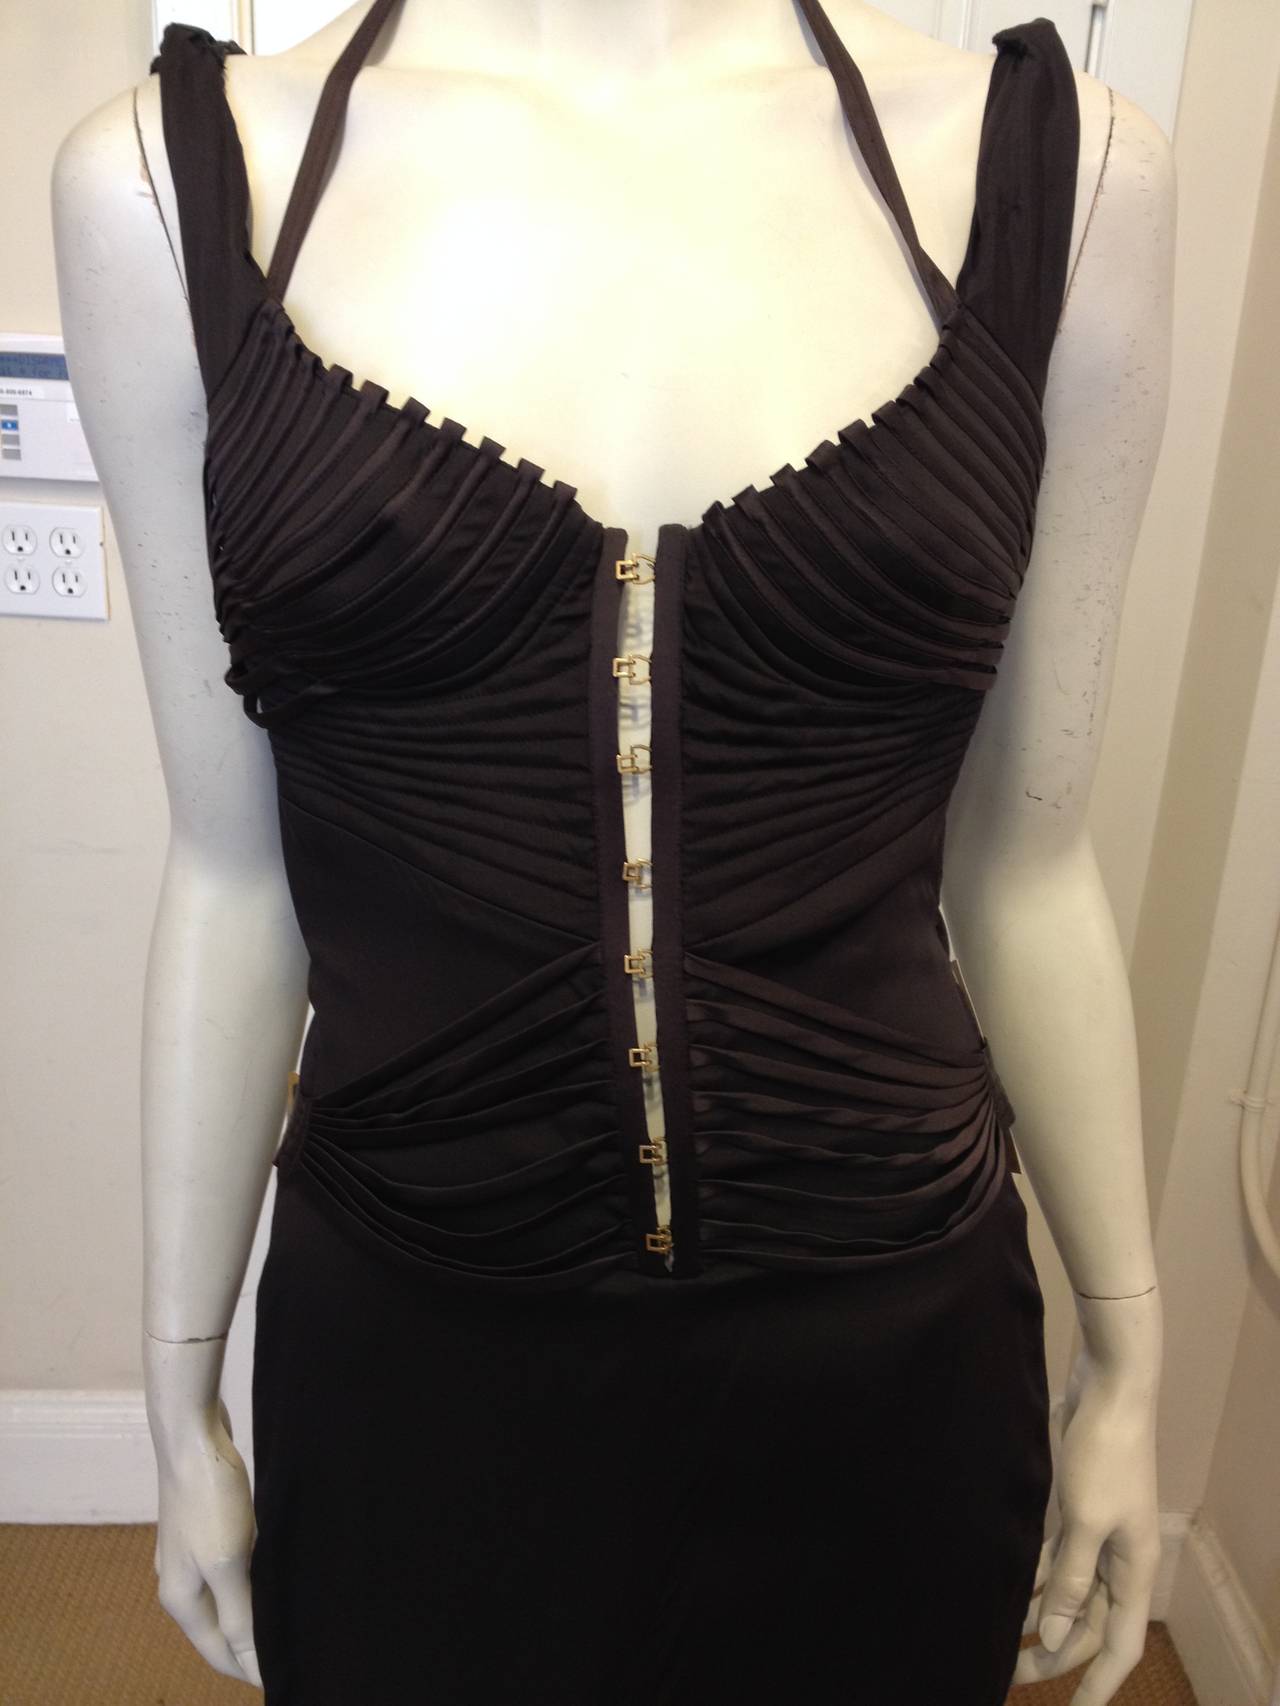 In a dark, rich brown silk, this dress is truly amazing . The structured bustier-style top is decorated with brown silk-covered ribs, which run in concentric lines across the bust, torso, and back and can be adjusted with little gold buckles. The